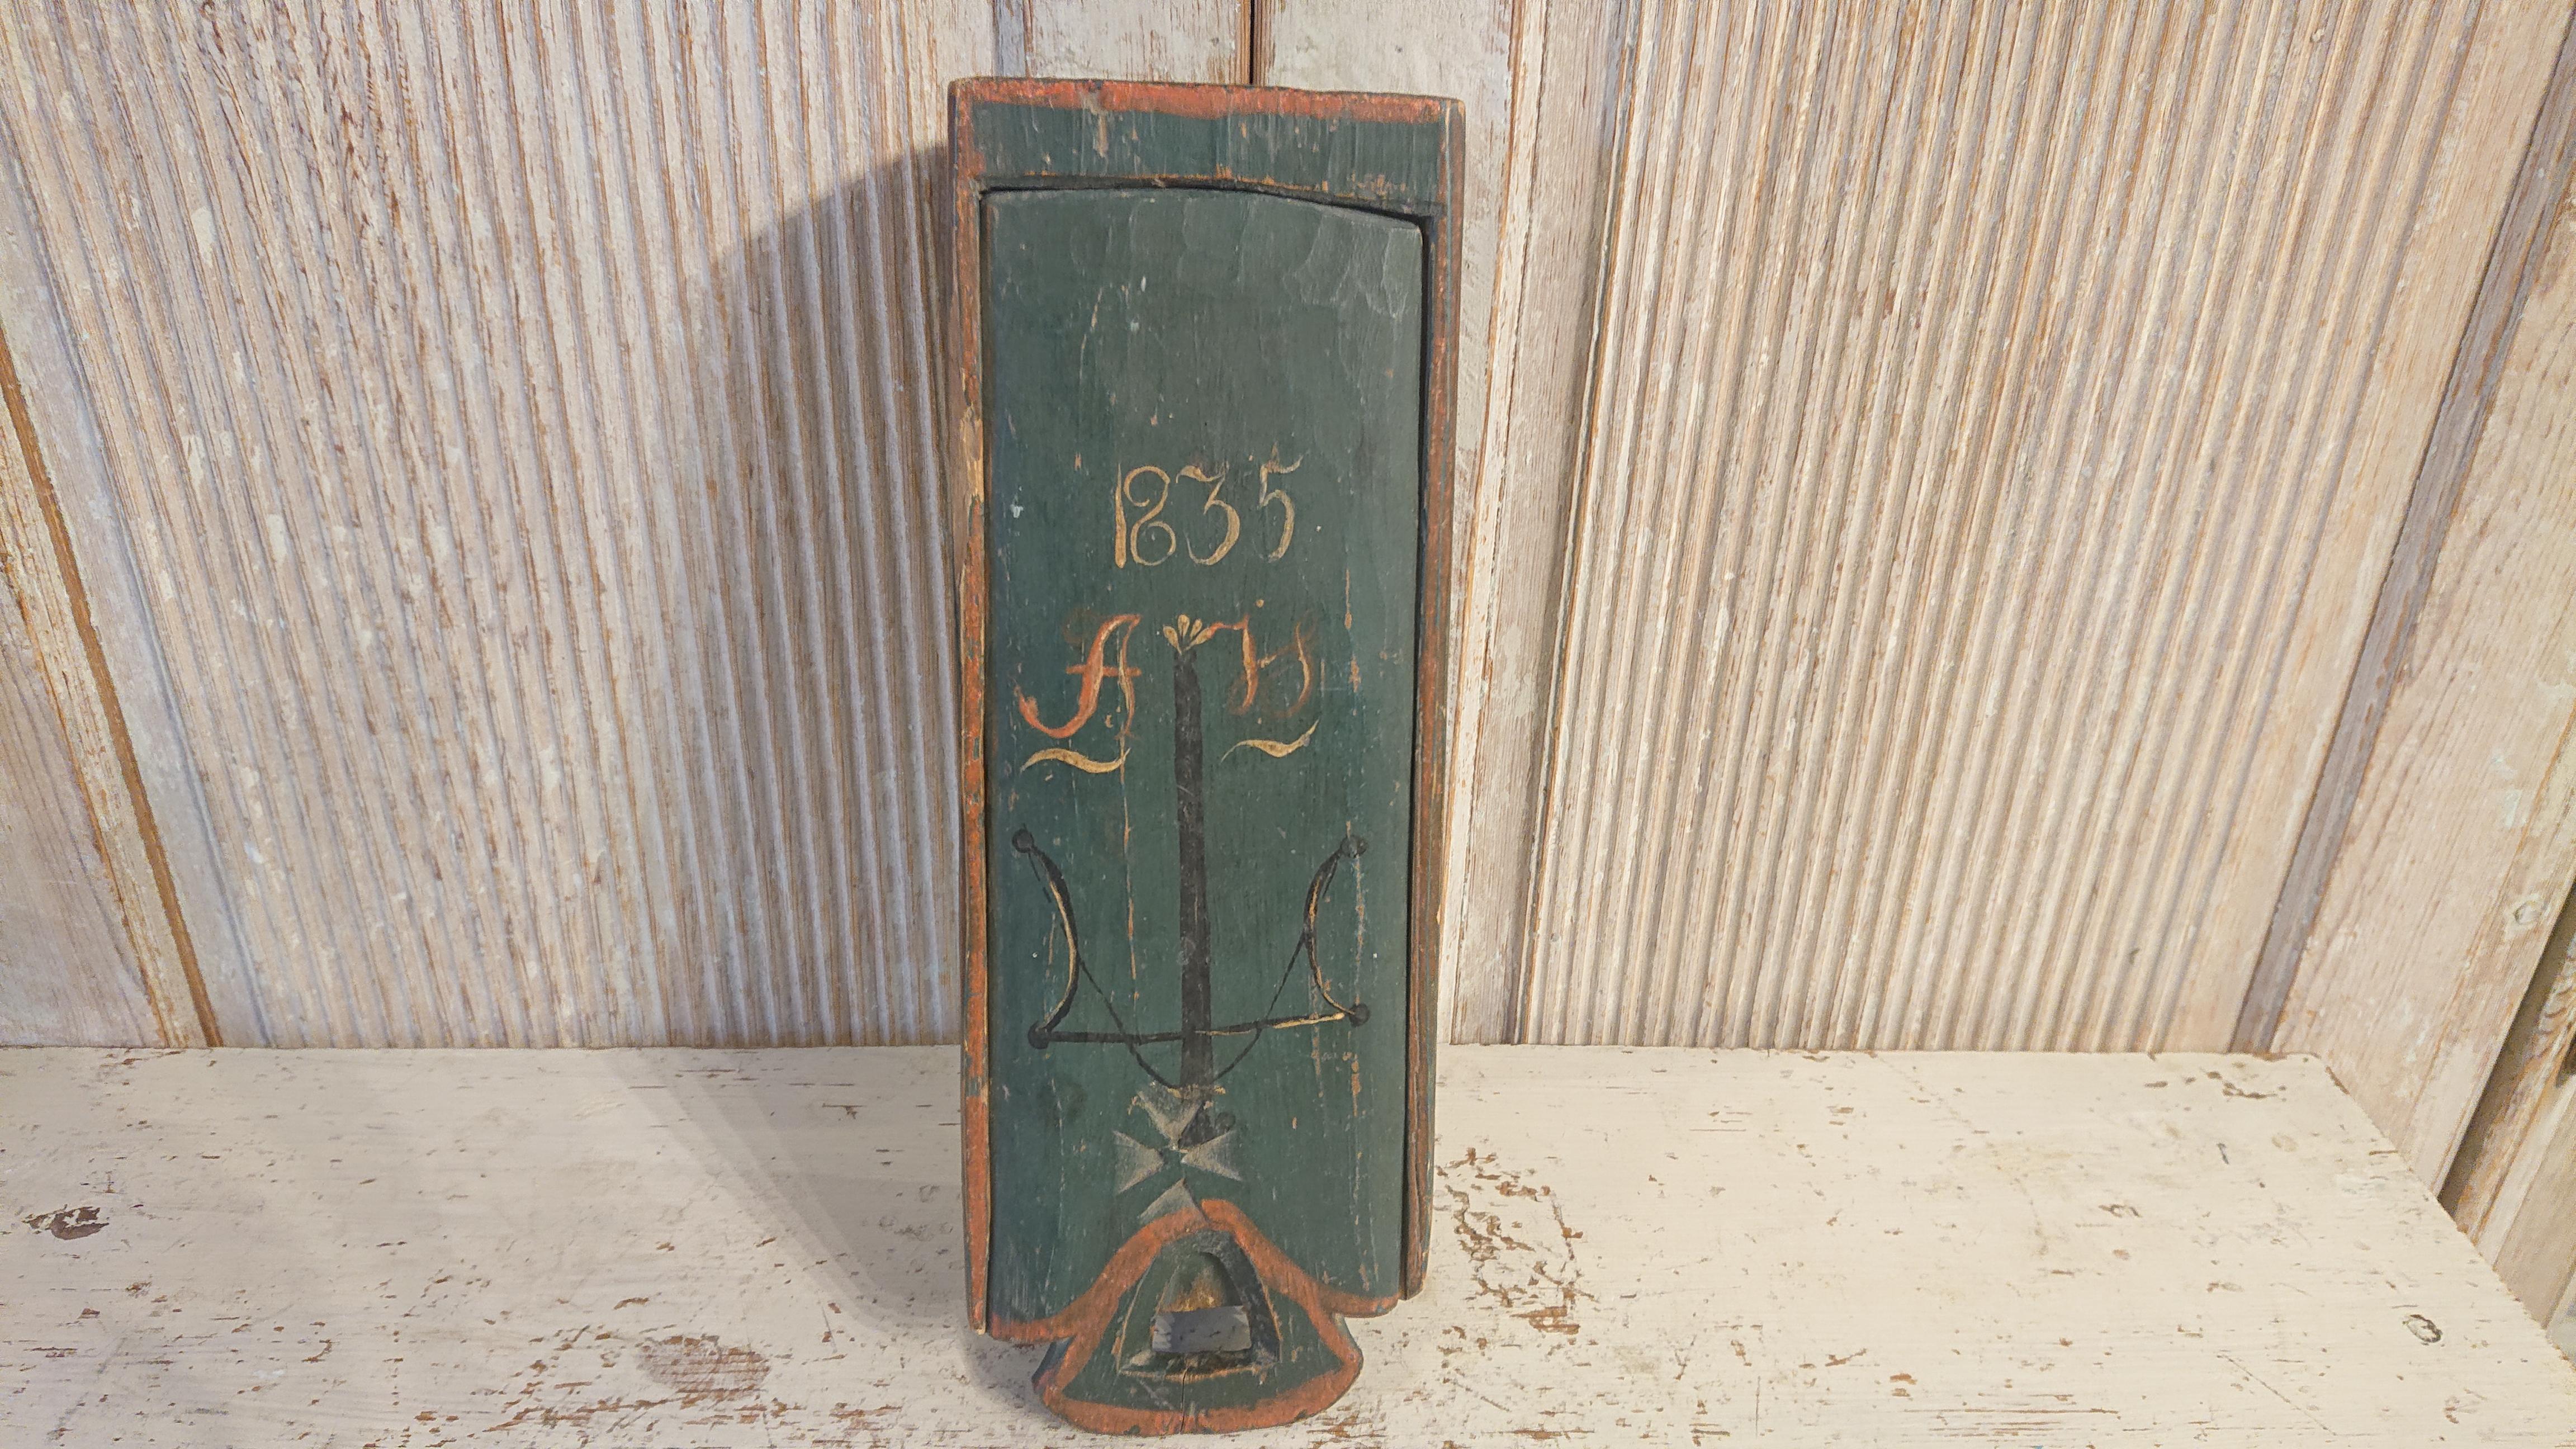 19th century Swedish wooden box from Umeå västerbotten,Northern Sweden
An beautiful untouched original painted box with beautiful colors dated 1825,it has monogram AH
Beautiful painted bow on the lid and arrows on both sides on the box.
Good